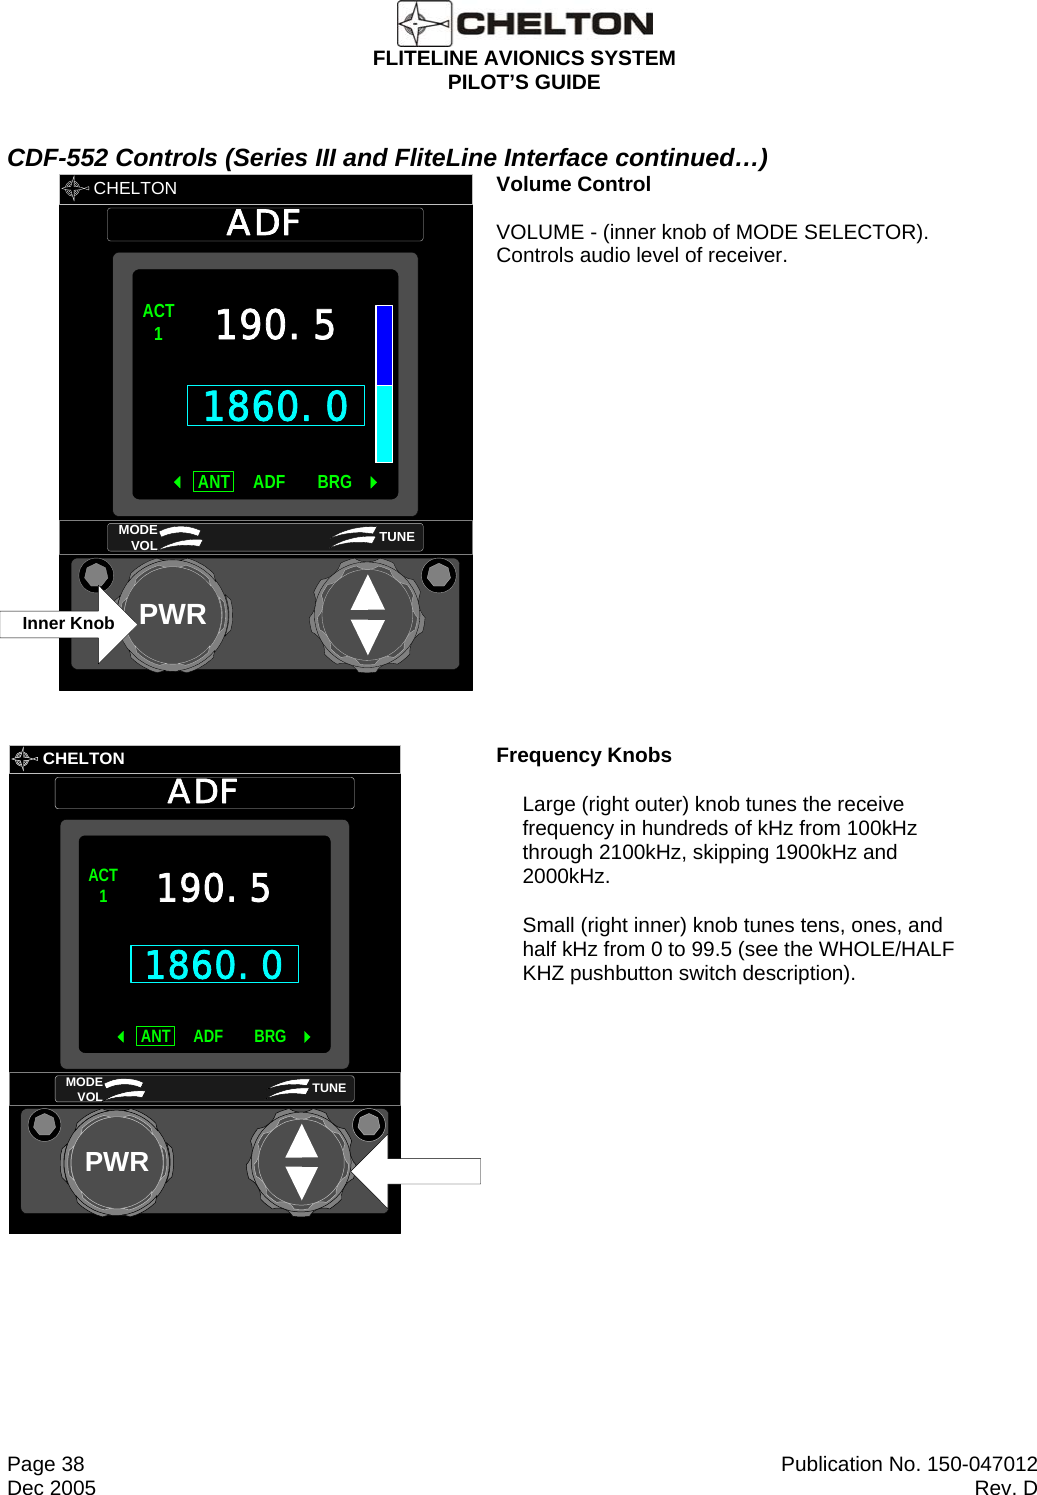  FLITELINE AVIONICS SYSTEM PILOT’S GUIDE  Page 38  Publication No. 150-047012 Dec 2005  Rev. D CDF-552 Controls (Series III and FliteLine Interface continued…)       CHELTON ADFPWR1860.0ACT1 ANT BRGADF 190.5MODE VOL TUNEInner Knob       Volume Control   VOLUME - (inner knob of MODE SELECTOR).  Controls audio level of receiver.       CHELTONADFPWR1860.0ACT1ANT BRGADF190.5MODE VOL TUNE Frequency Knobs Large (right outer) knob tunes the receive frequency in hundreds of kHz from 100kHz through 2100kHz, skipping 1900kHz and 2000kHz. Small (right inner) knob tunes tens, ones, and half kHz from 0 to 99.5 (see the WHOLE/HALF KHZ pushbutton switch description). 